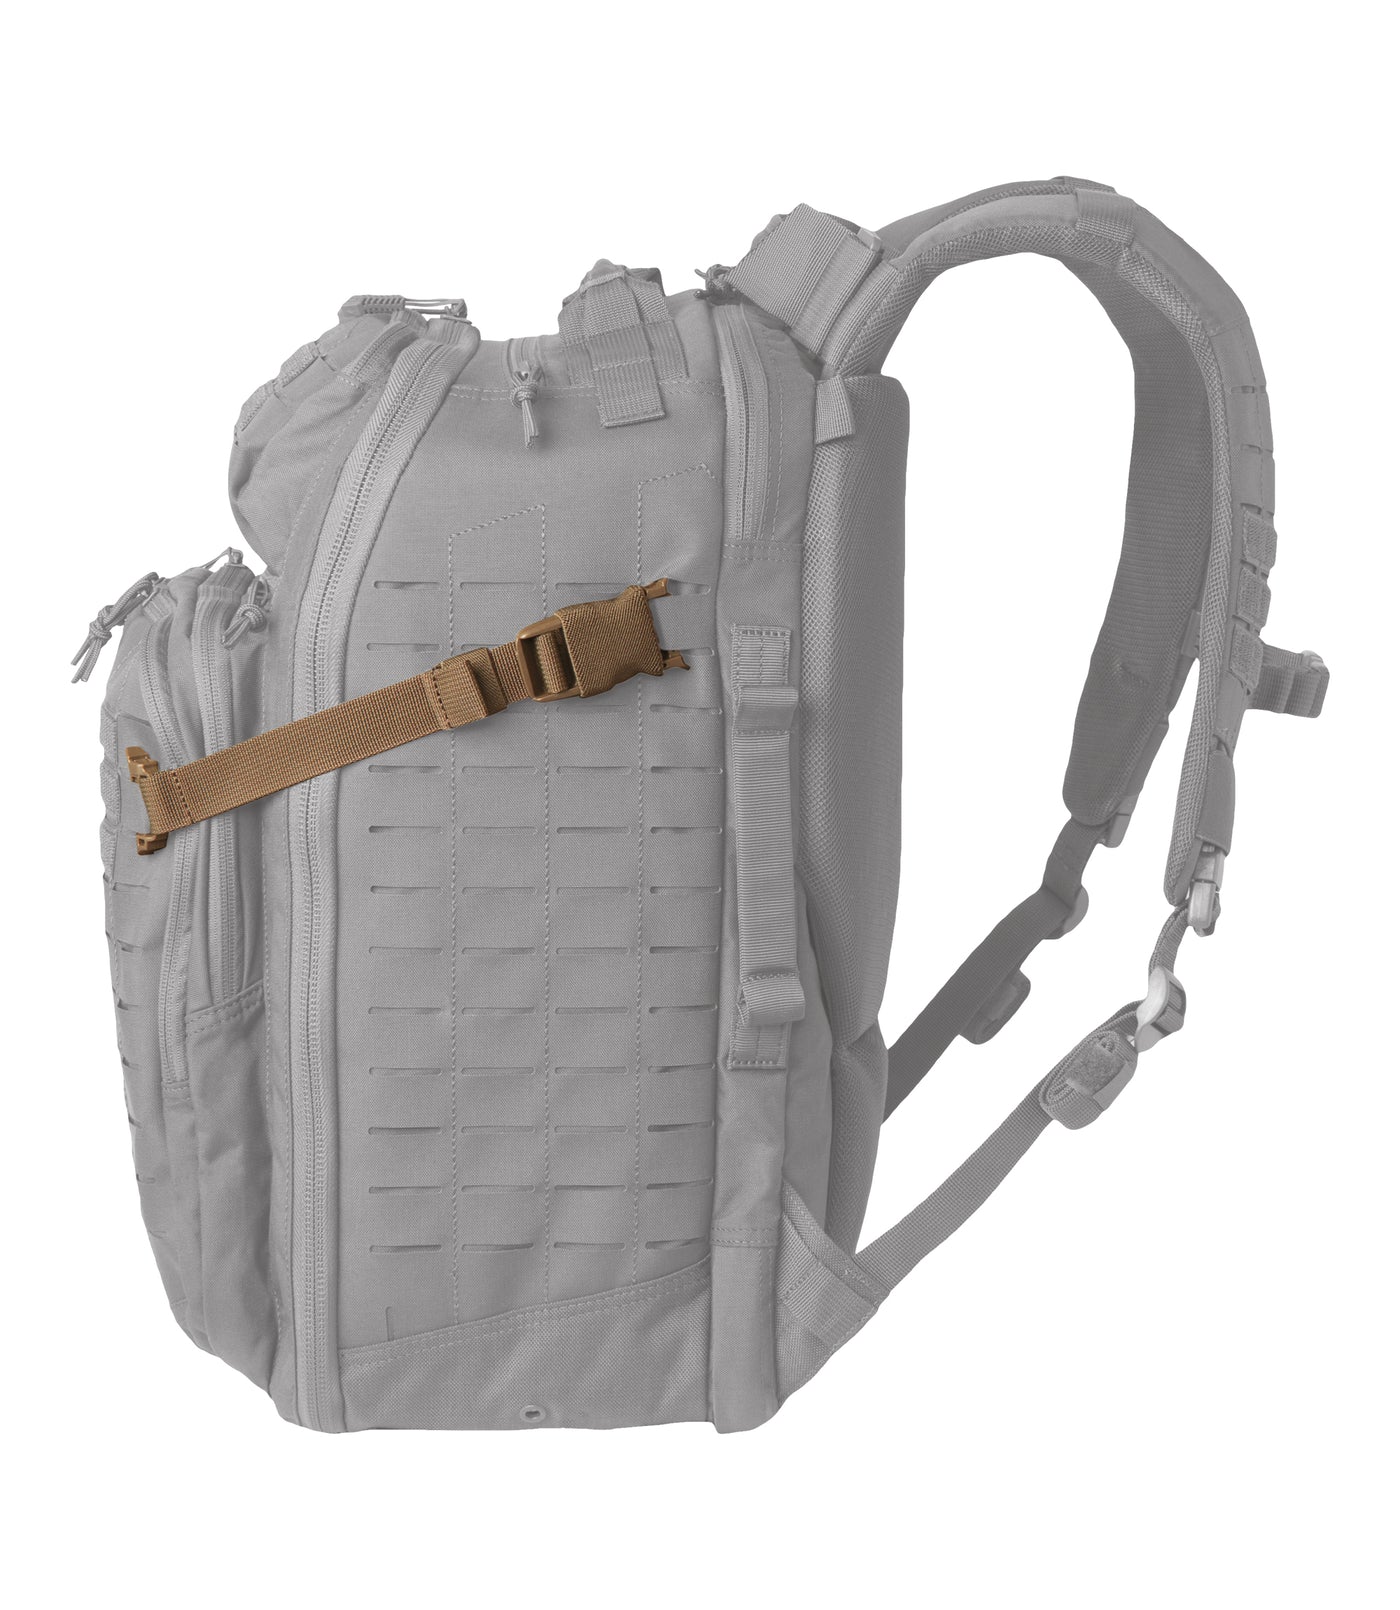 5.11 Rush backpack compression strap adjustment by fns720, Download free  STL model